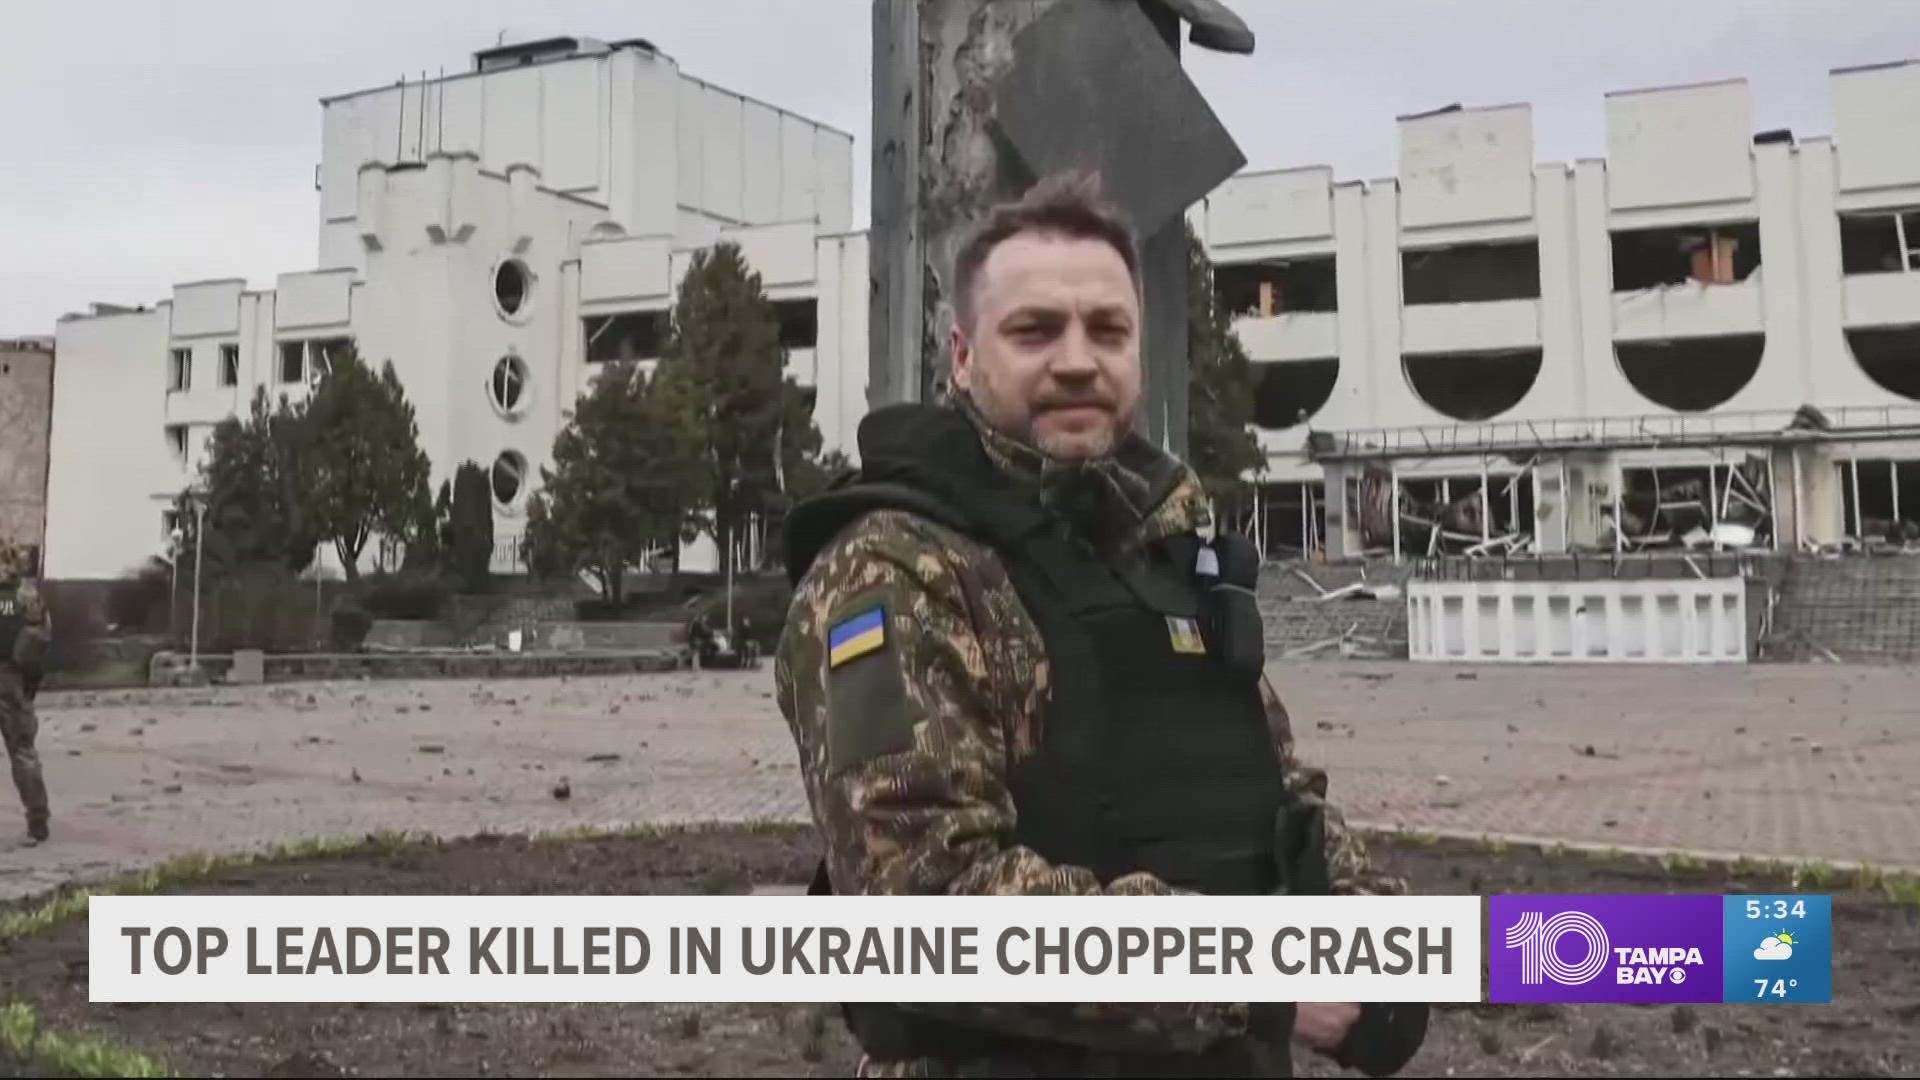 The cause of the crash was unclear Wednesday morning, but it comes days after a deadly Russian attack on an apartment building that killed 45.